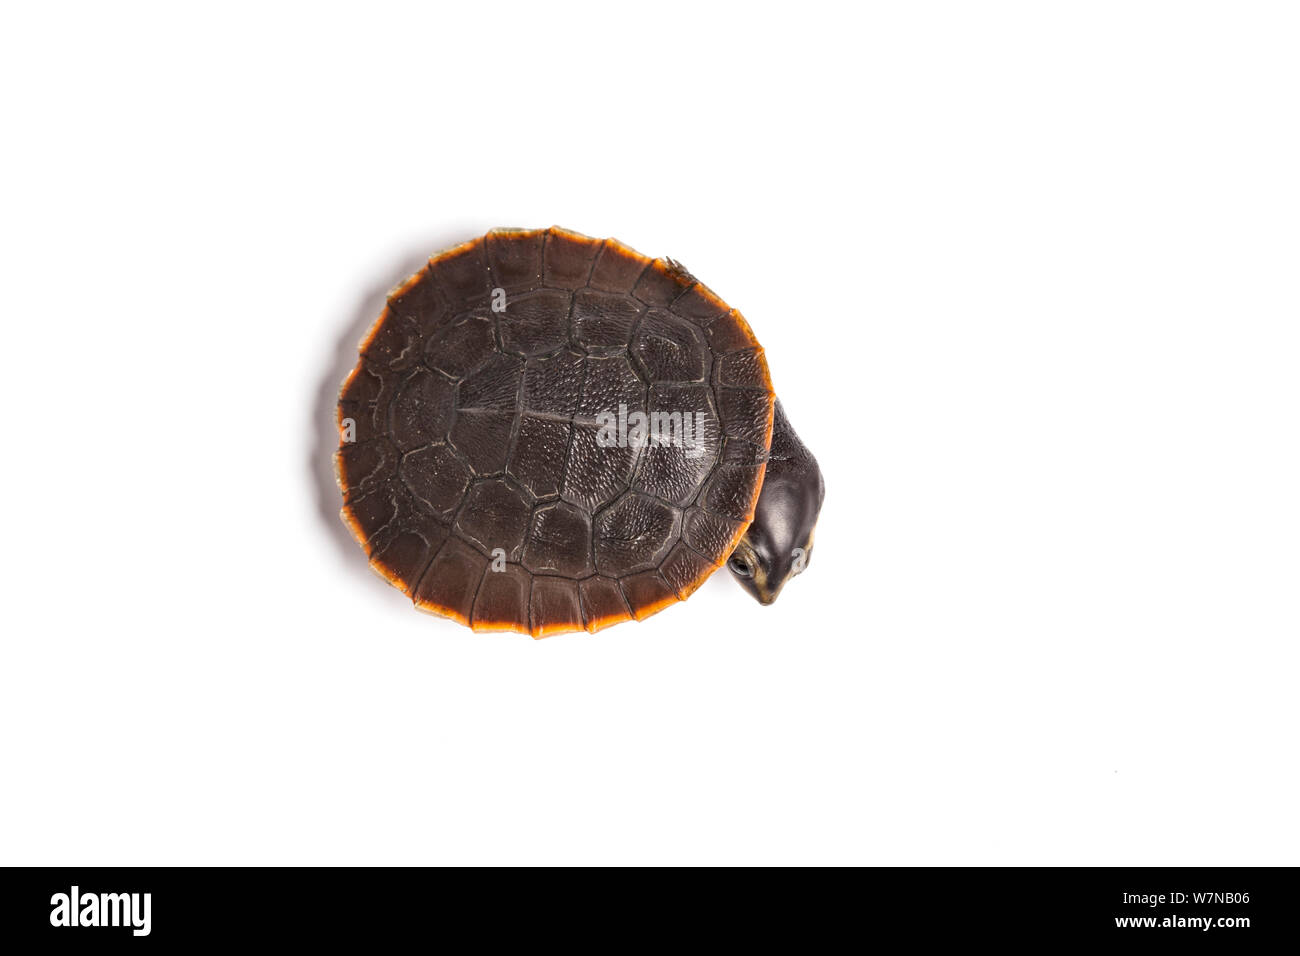 Red bellied short neck turtle (Emydura subglobosa), captive, from New Guinea Stock Photo